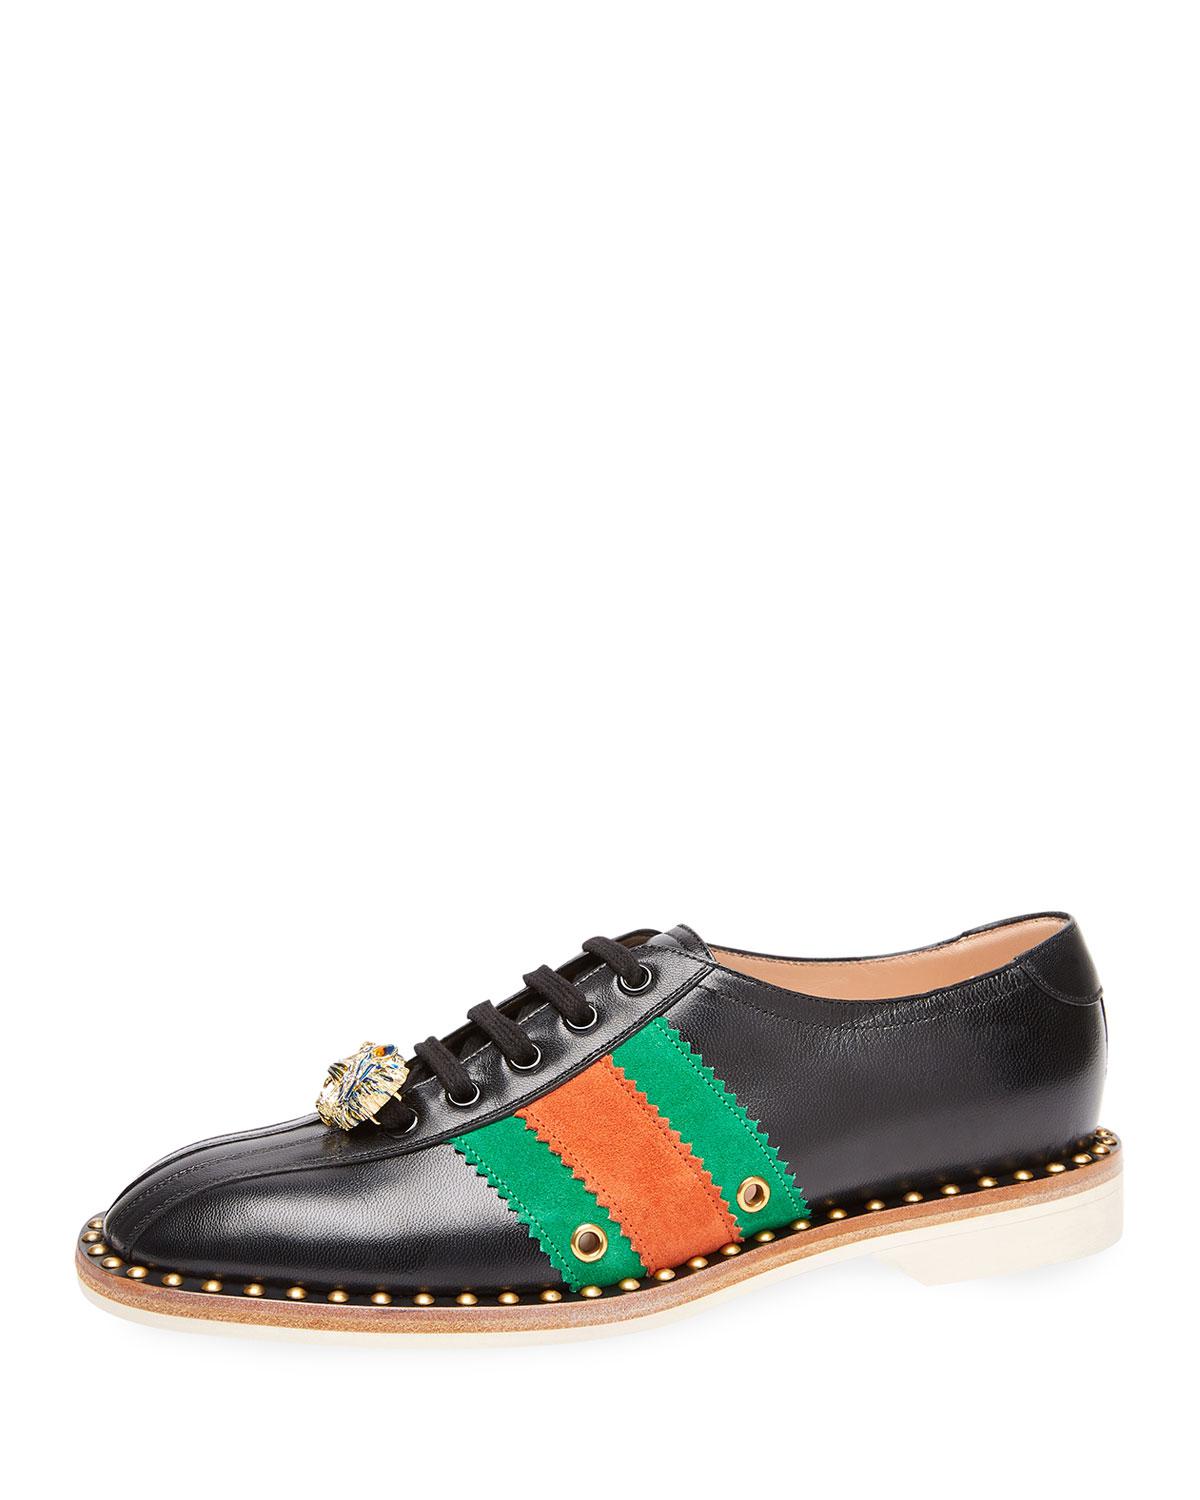 Gucci Leather Lace-up Bowling Shoe 